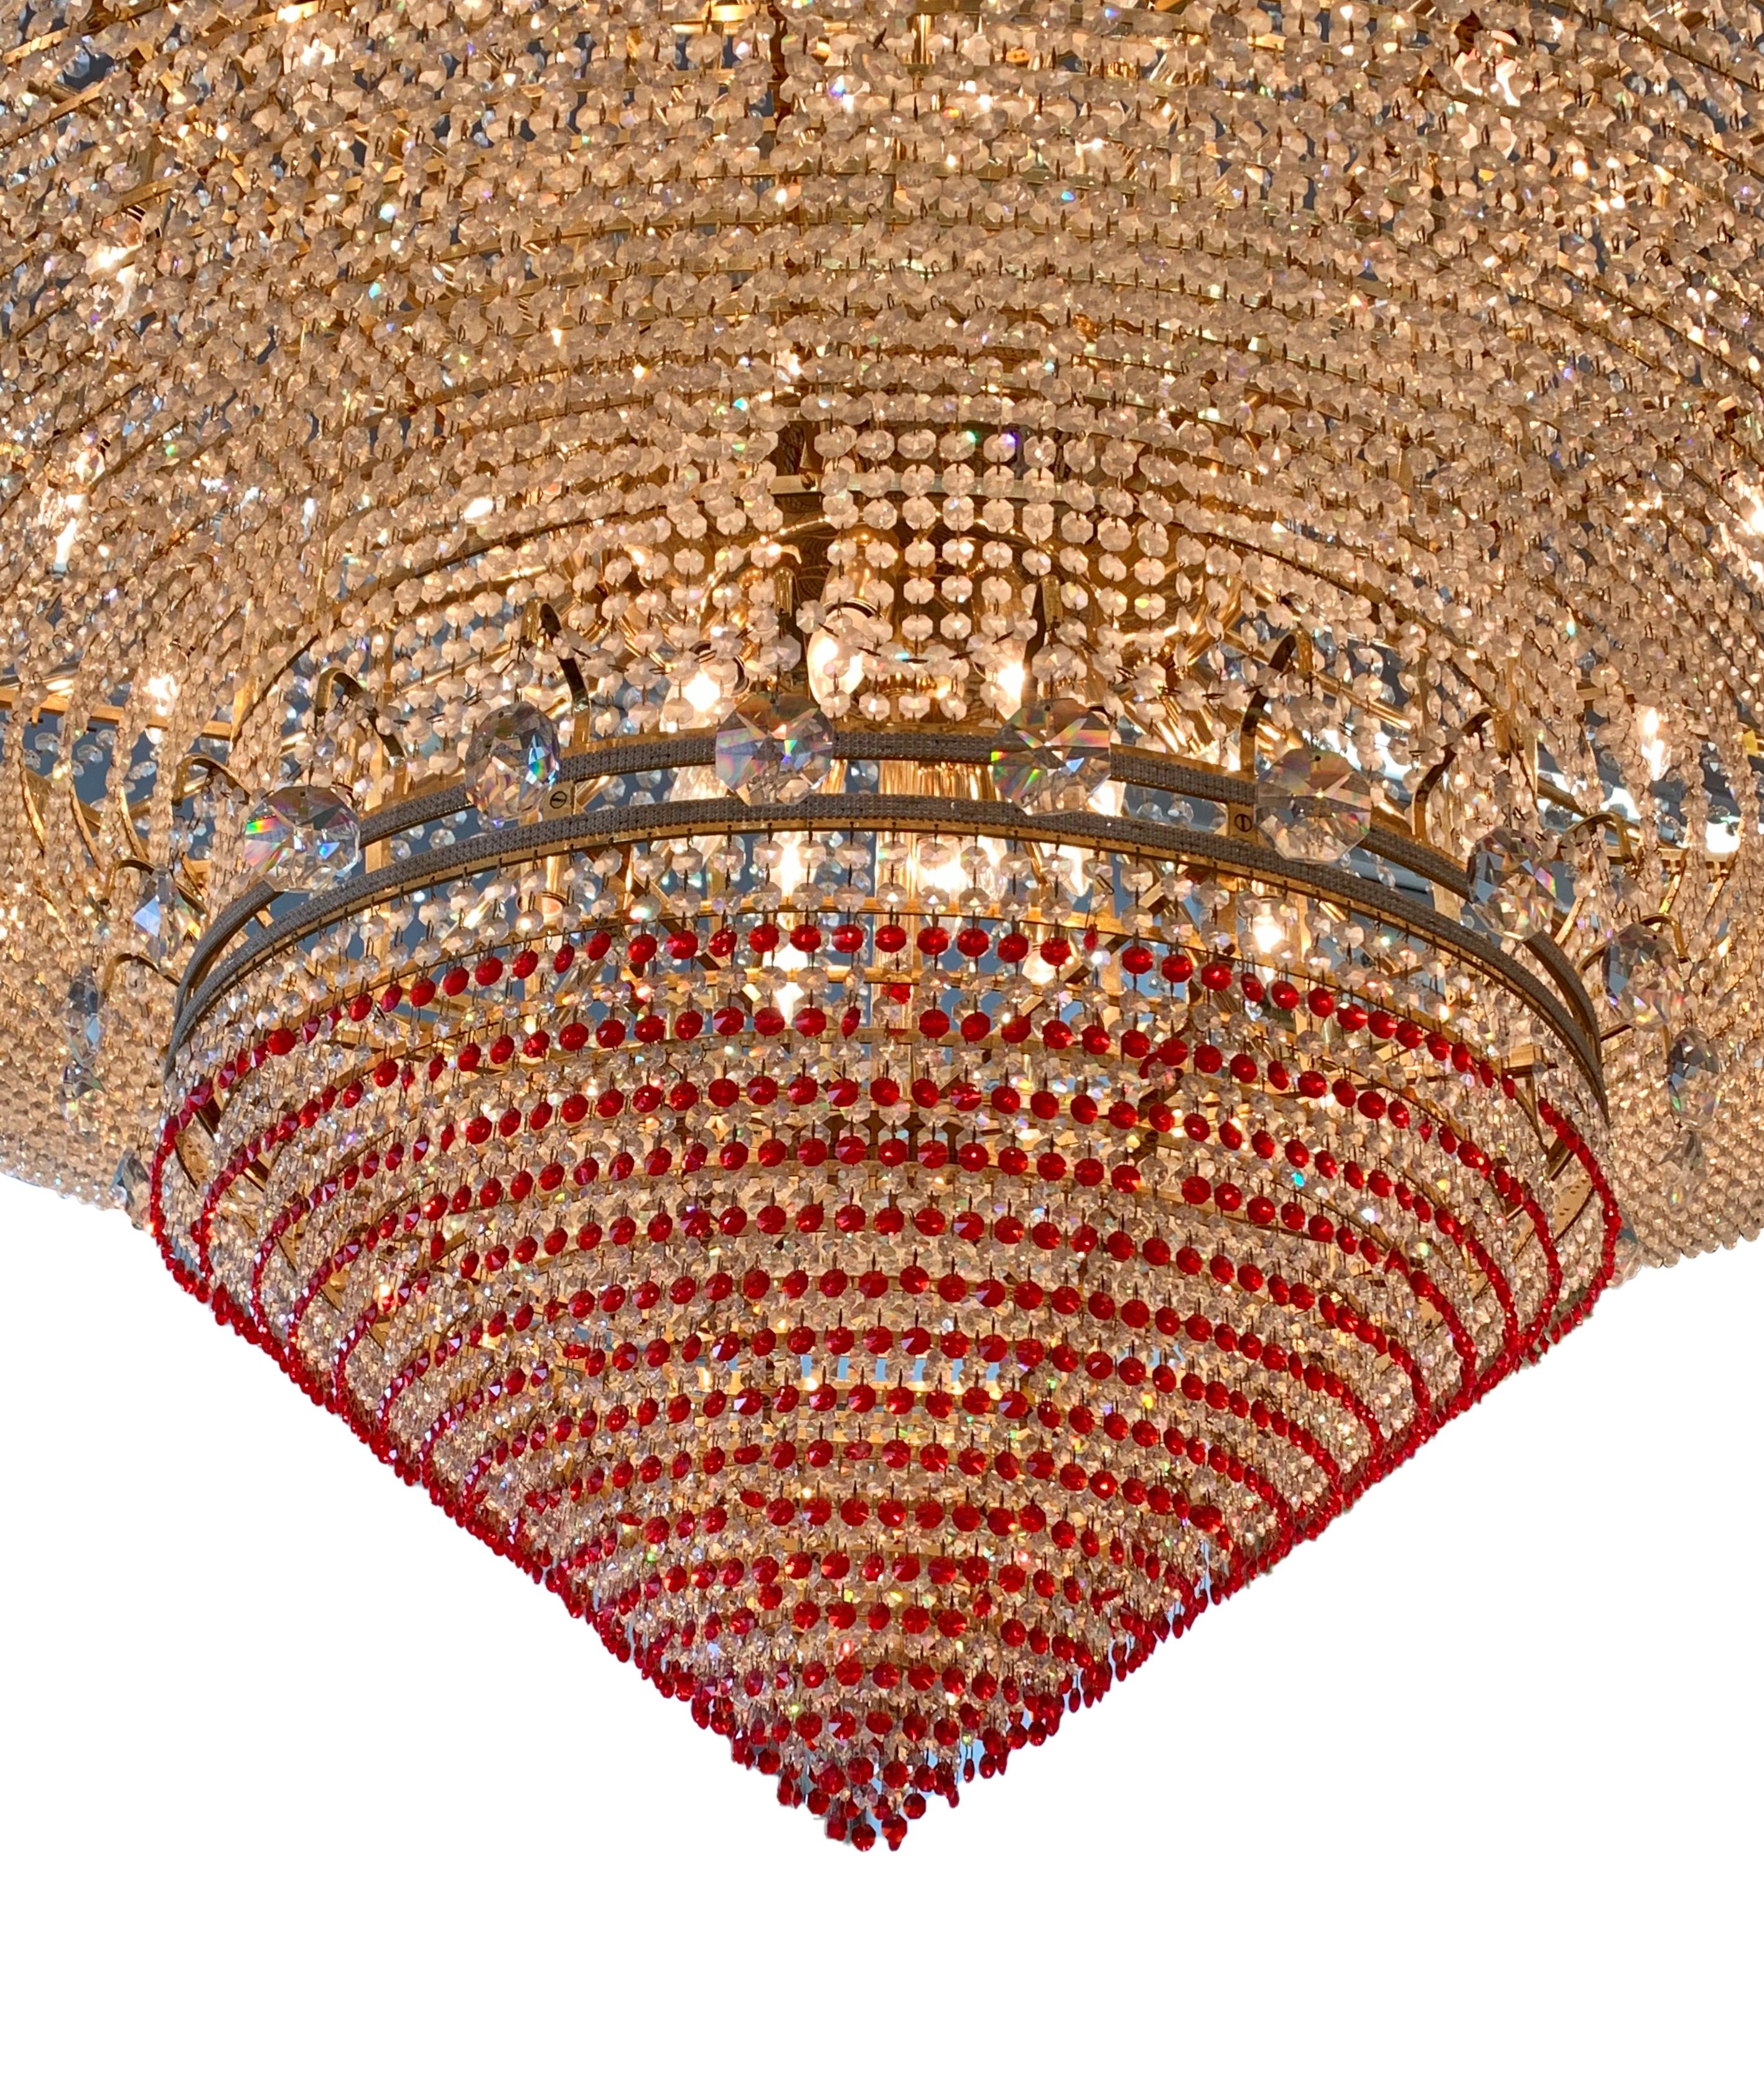 Monumental Red and Clear Crystal Ballroom Chandelier 7 feet x 7 feet In Excellent Condition For Sale In Los Angeles, CA